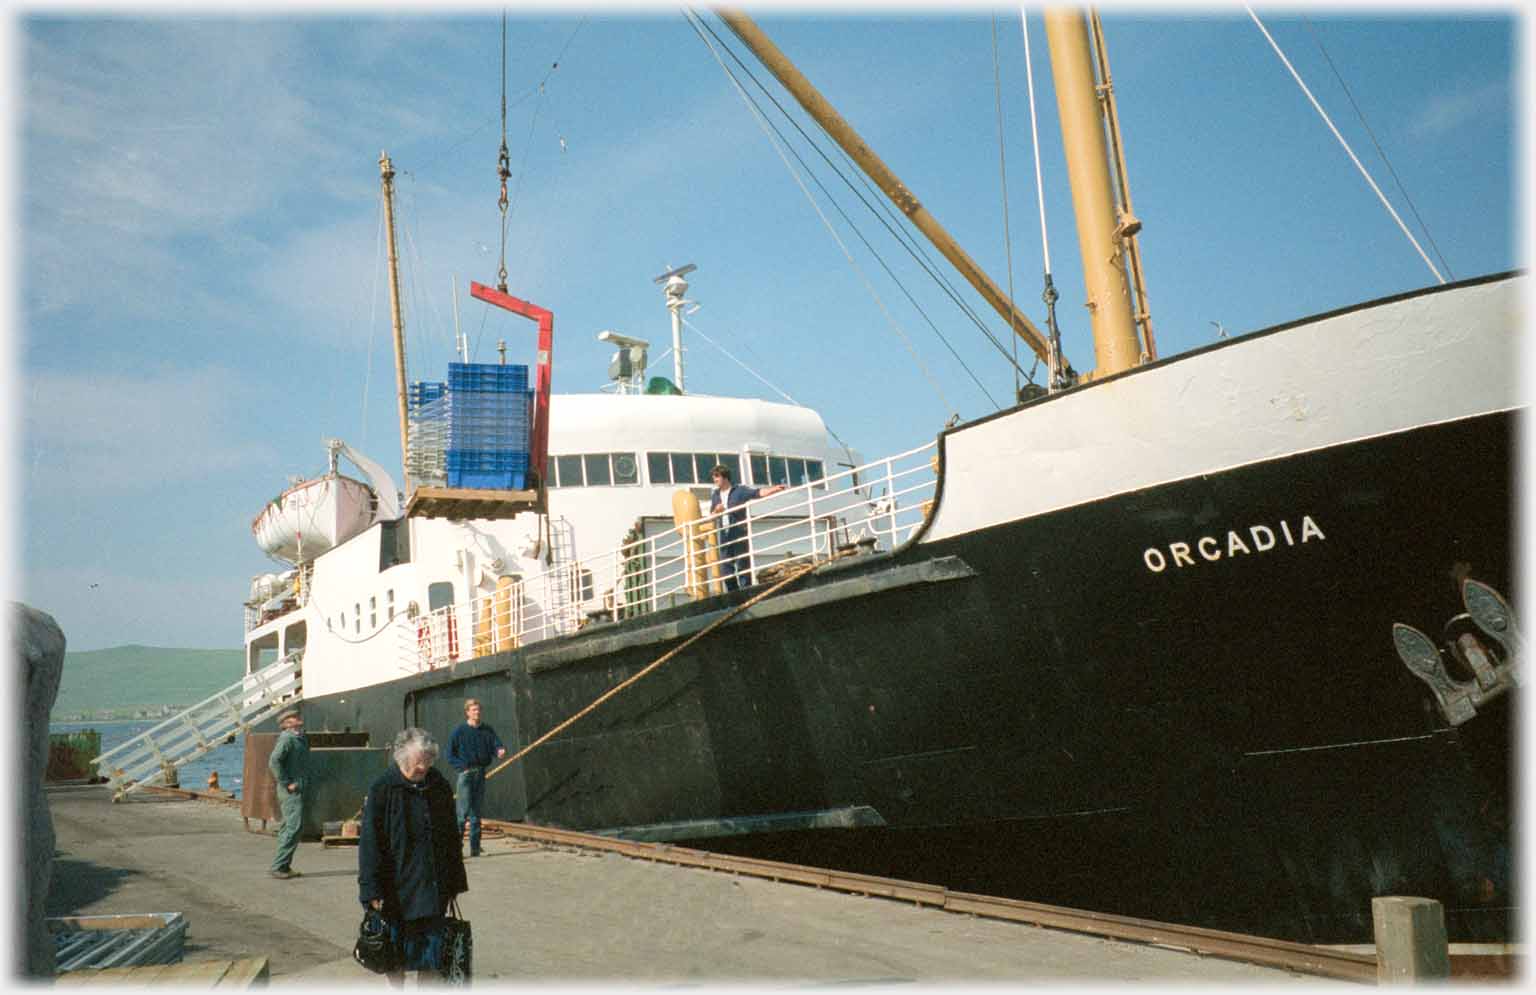 Ship at quayside being unloaded.